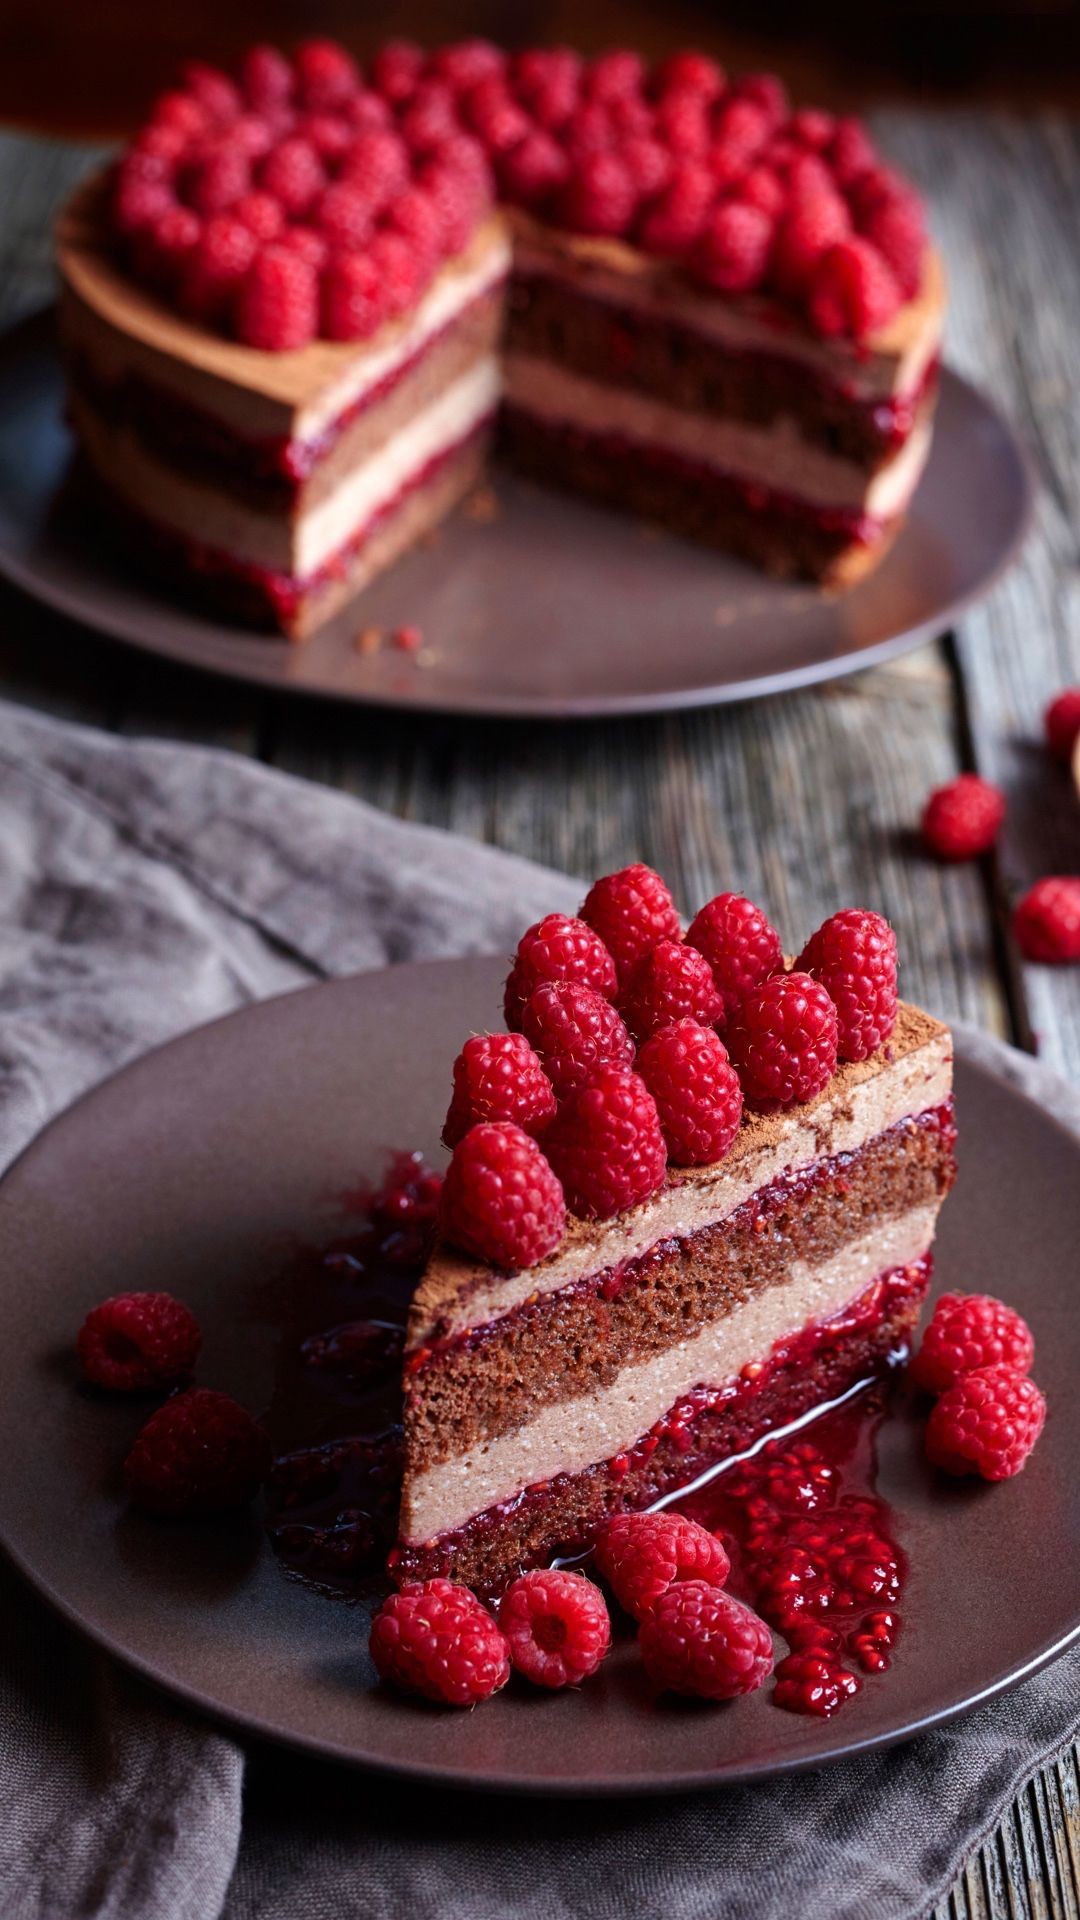 Cake iPhone Wallpaper Design with high-resolution 1080x1920 pixel. You can set as wallpaper for Apple iPhone X, XS Max, XR, 8, 7, 6, SE, iPad. Enjoy and share your favorite HD wallpapers and background images